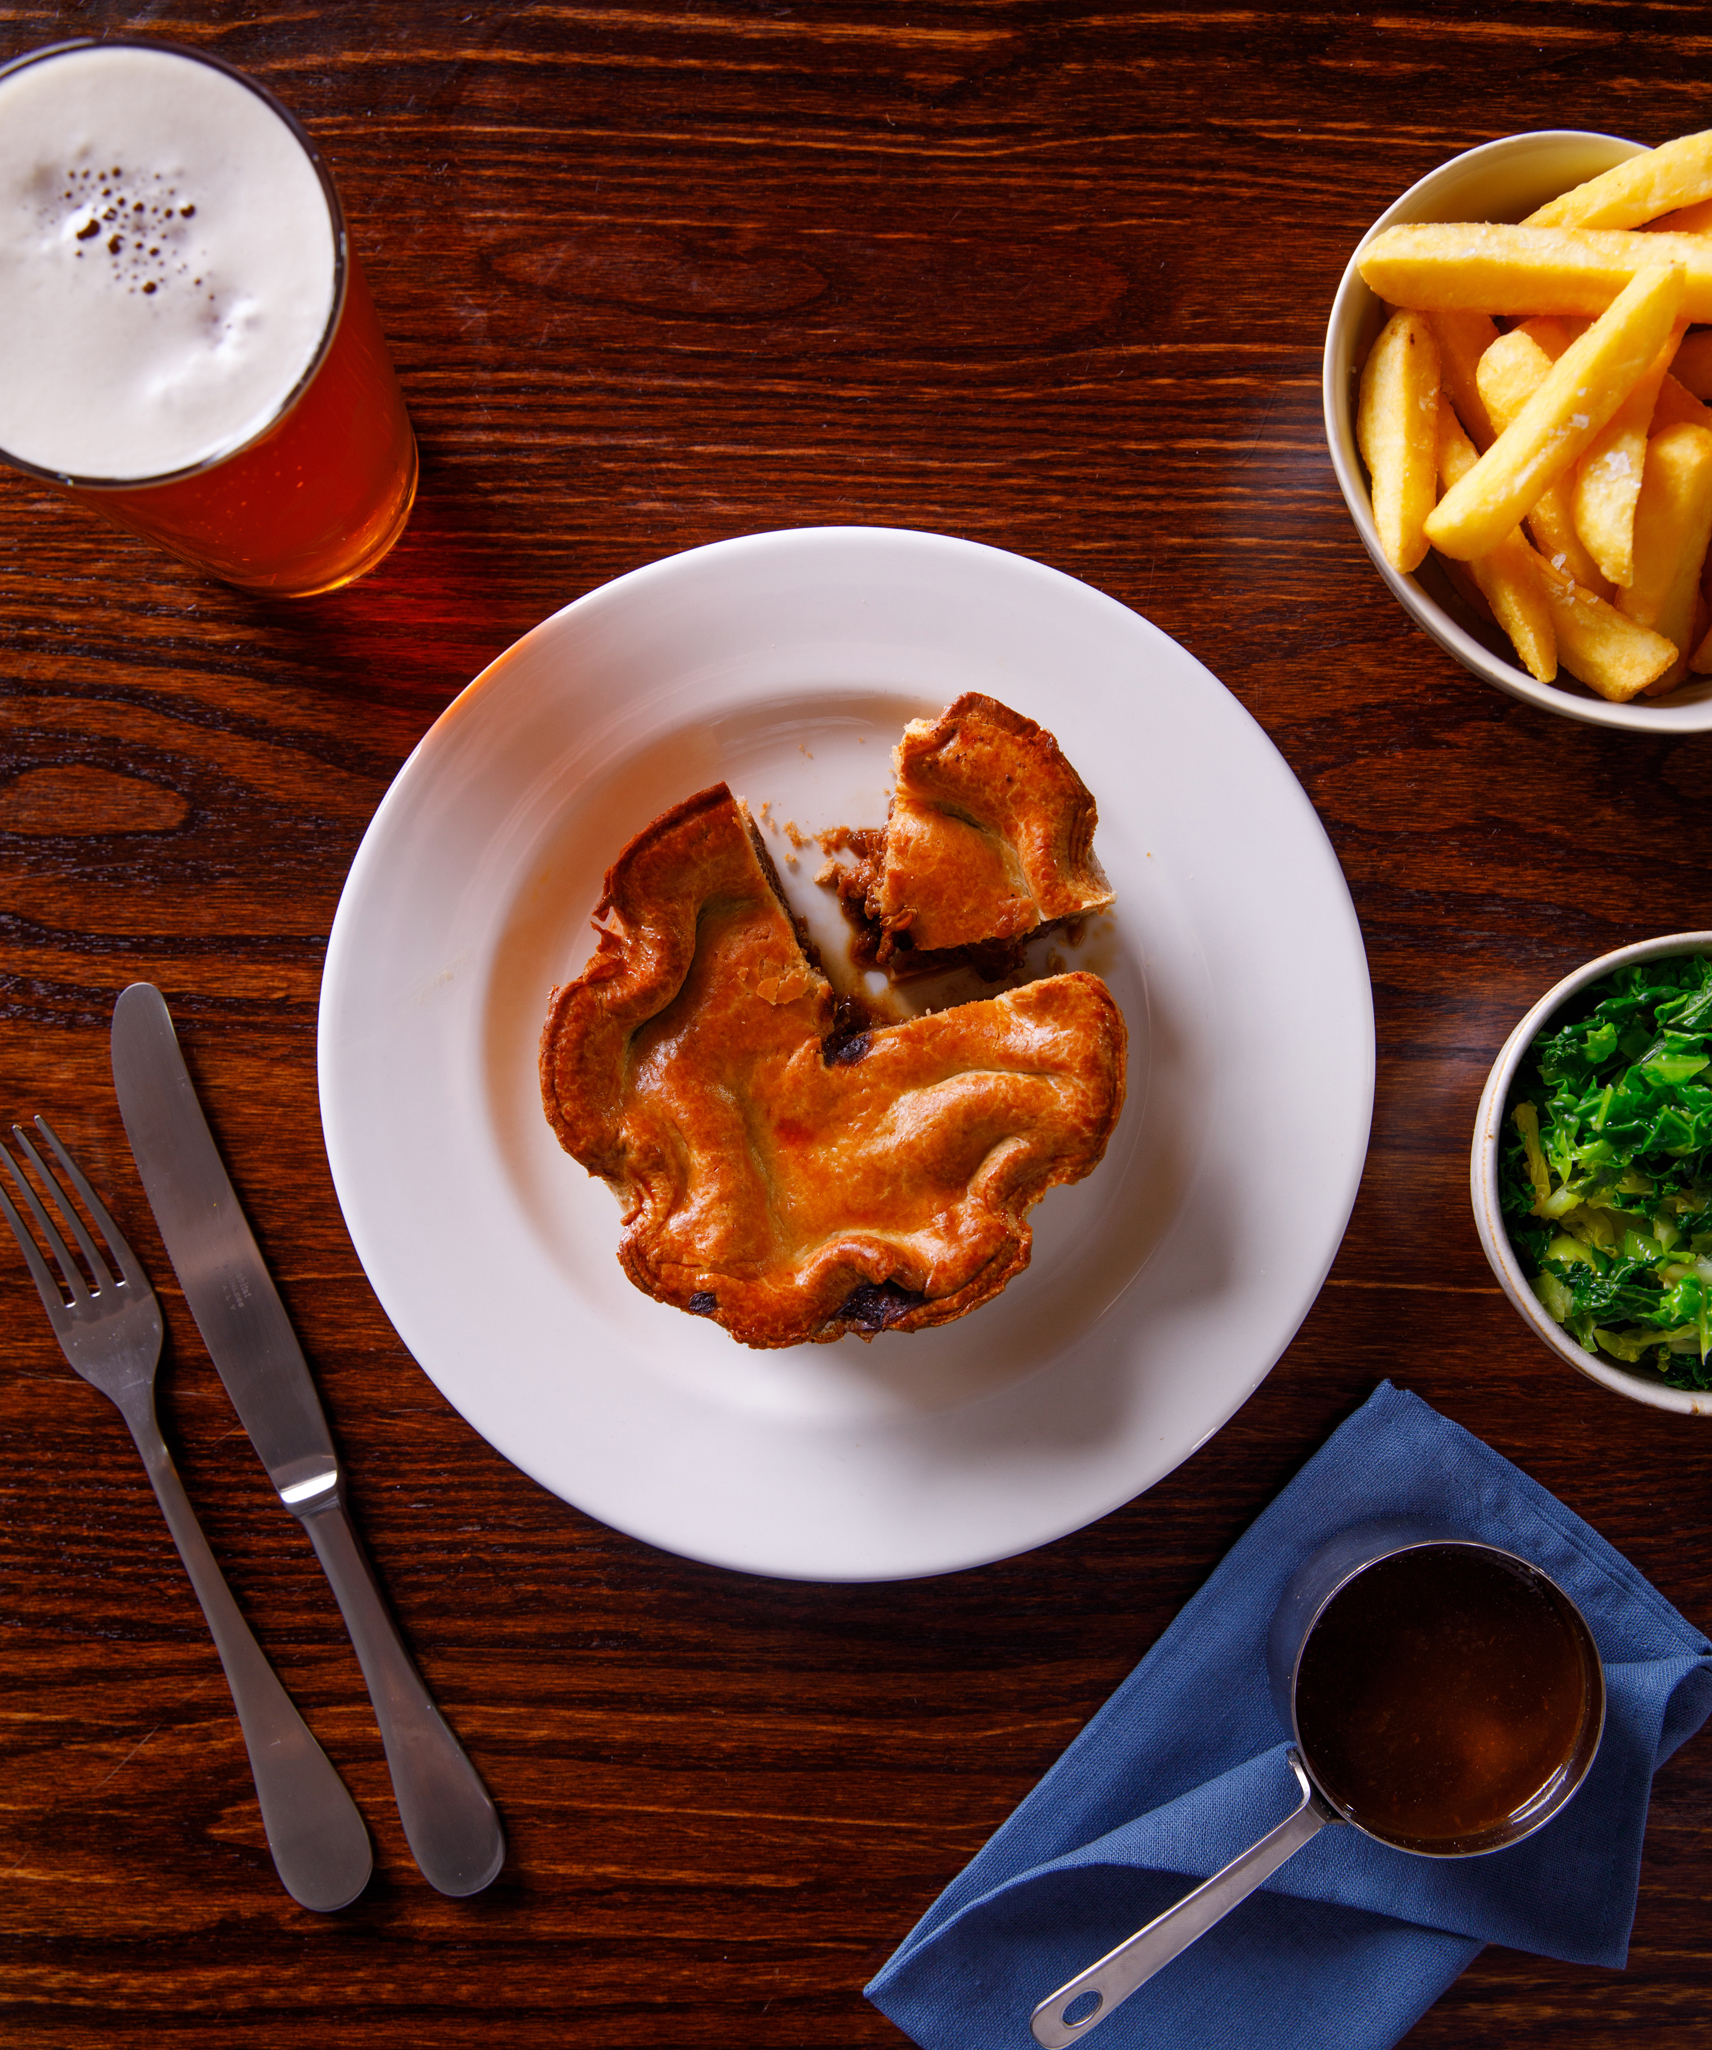 photo from above of a steak and ale pie. Pie is surrounded by a pint of beer, a bowl of chips, greens and a small pan of gravy